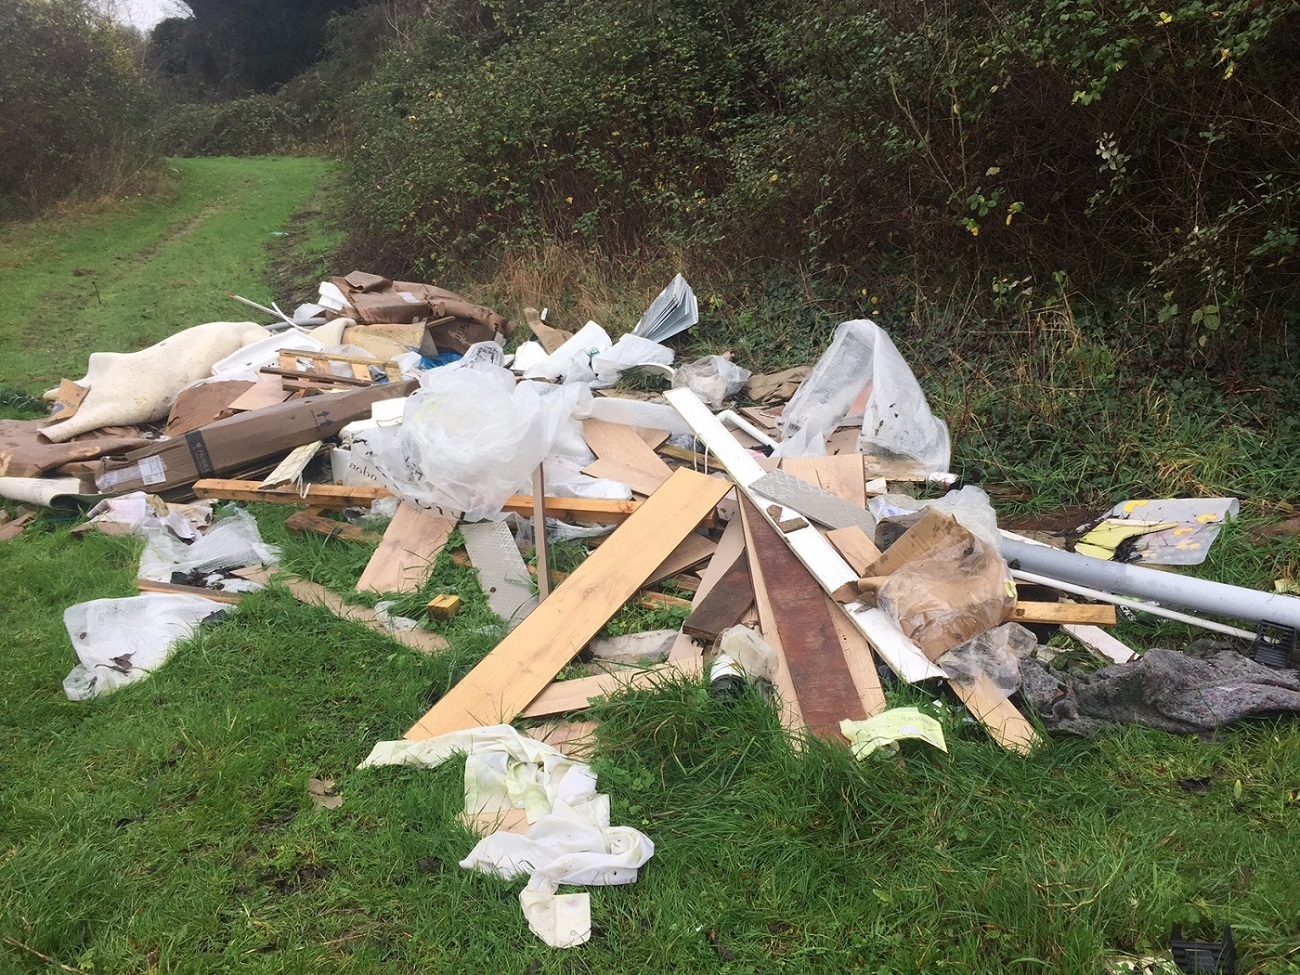 Slough is Berkshires fly-tipping hotspot, according to DEFRA data